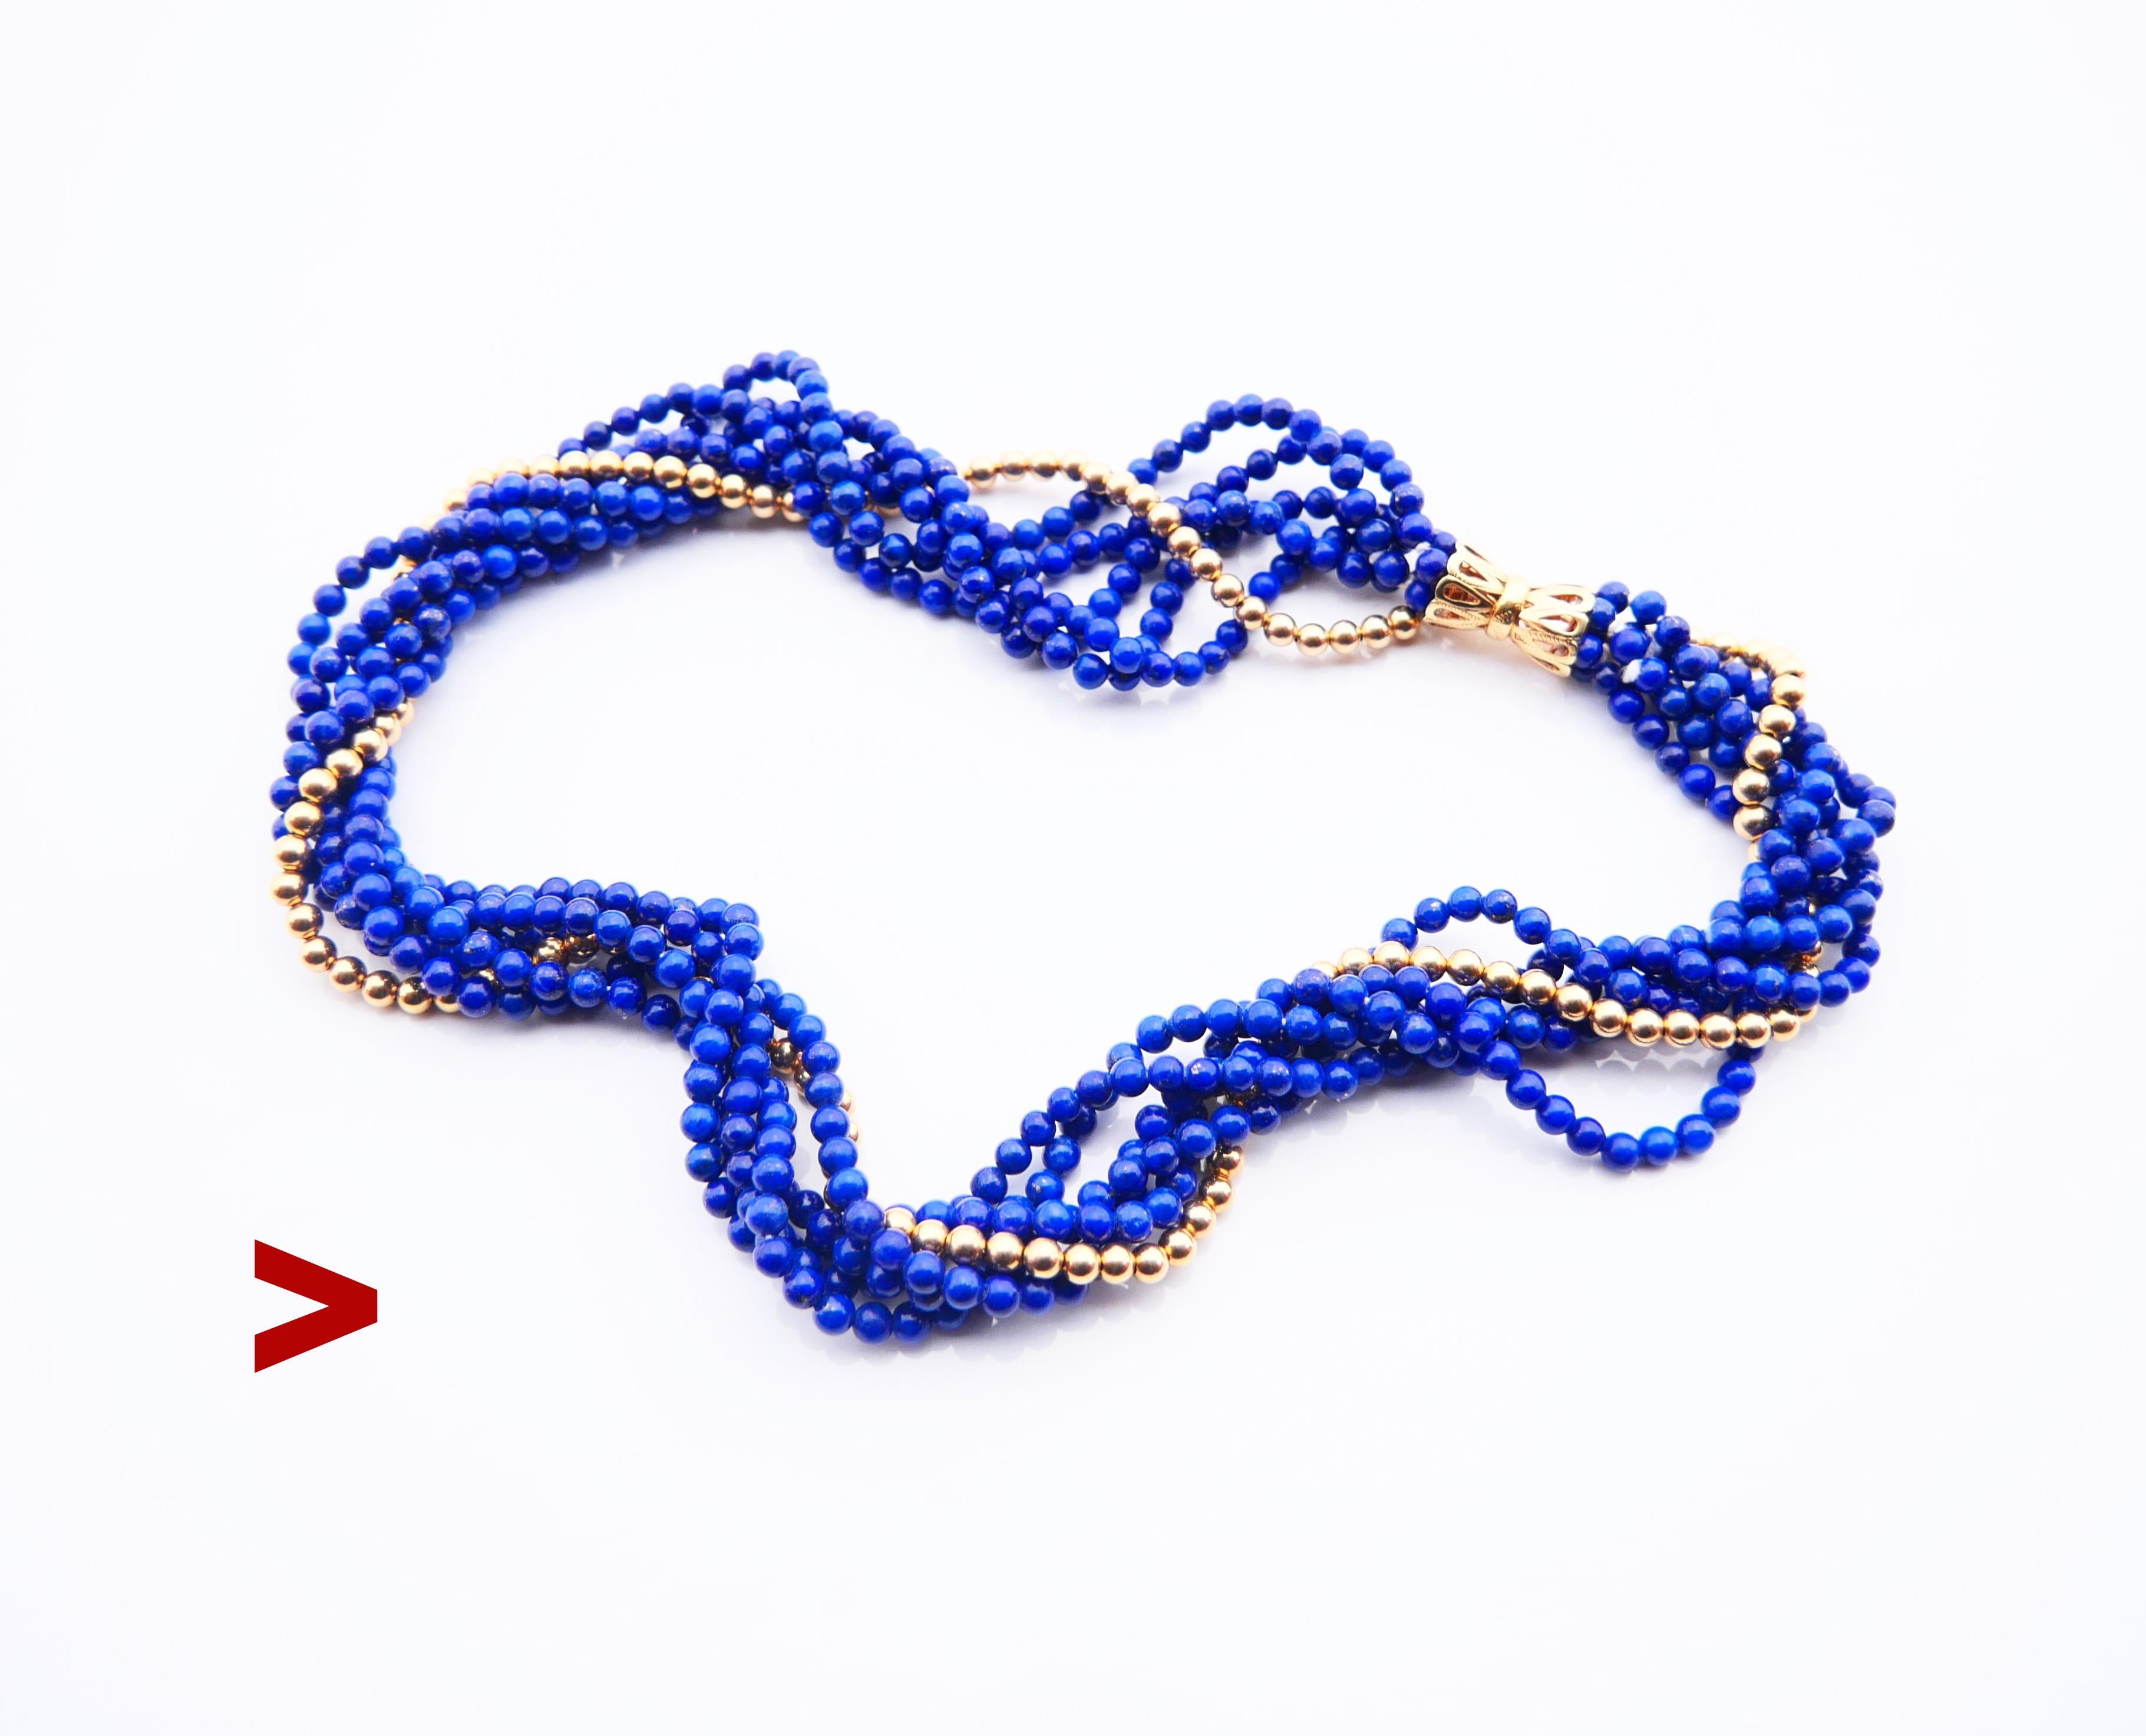 Necklace with 5 strands of numerous equally sized round cut Ø 4mm beads of natural Lapis Lazuli stone bound with one row of solid 14K beads of the same diameter. Ornamental openwork V-lock also in solid 14K Yellow Gold.

Hallmarked 14 k, hallmarks